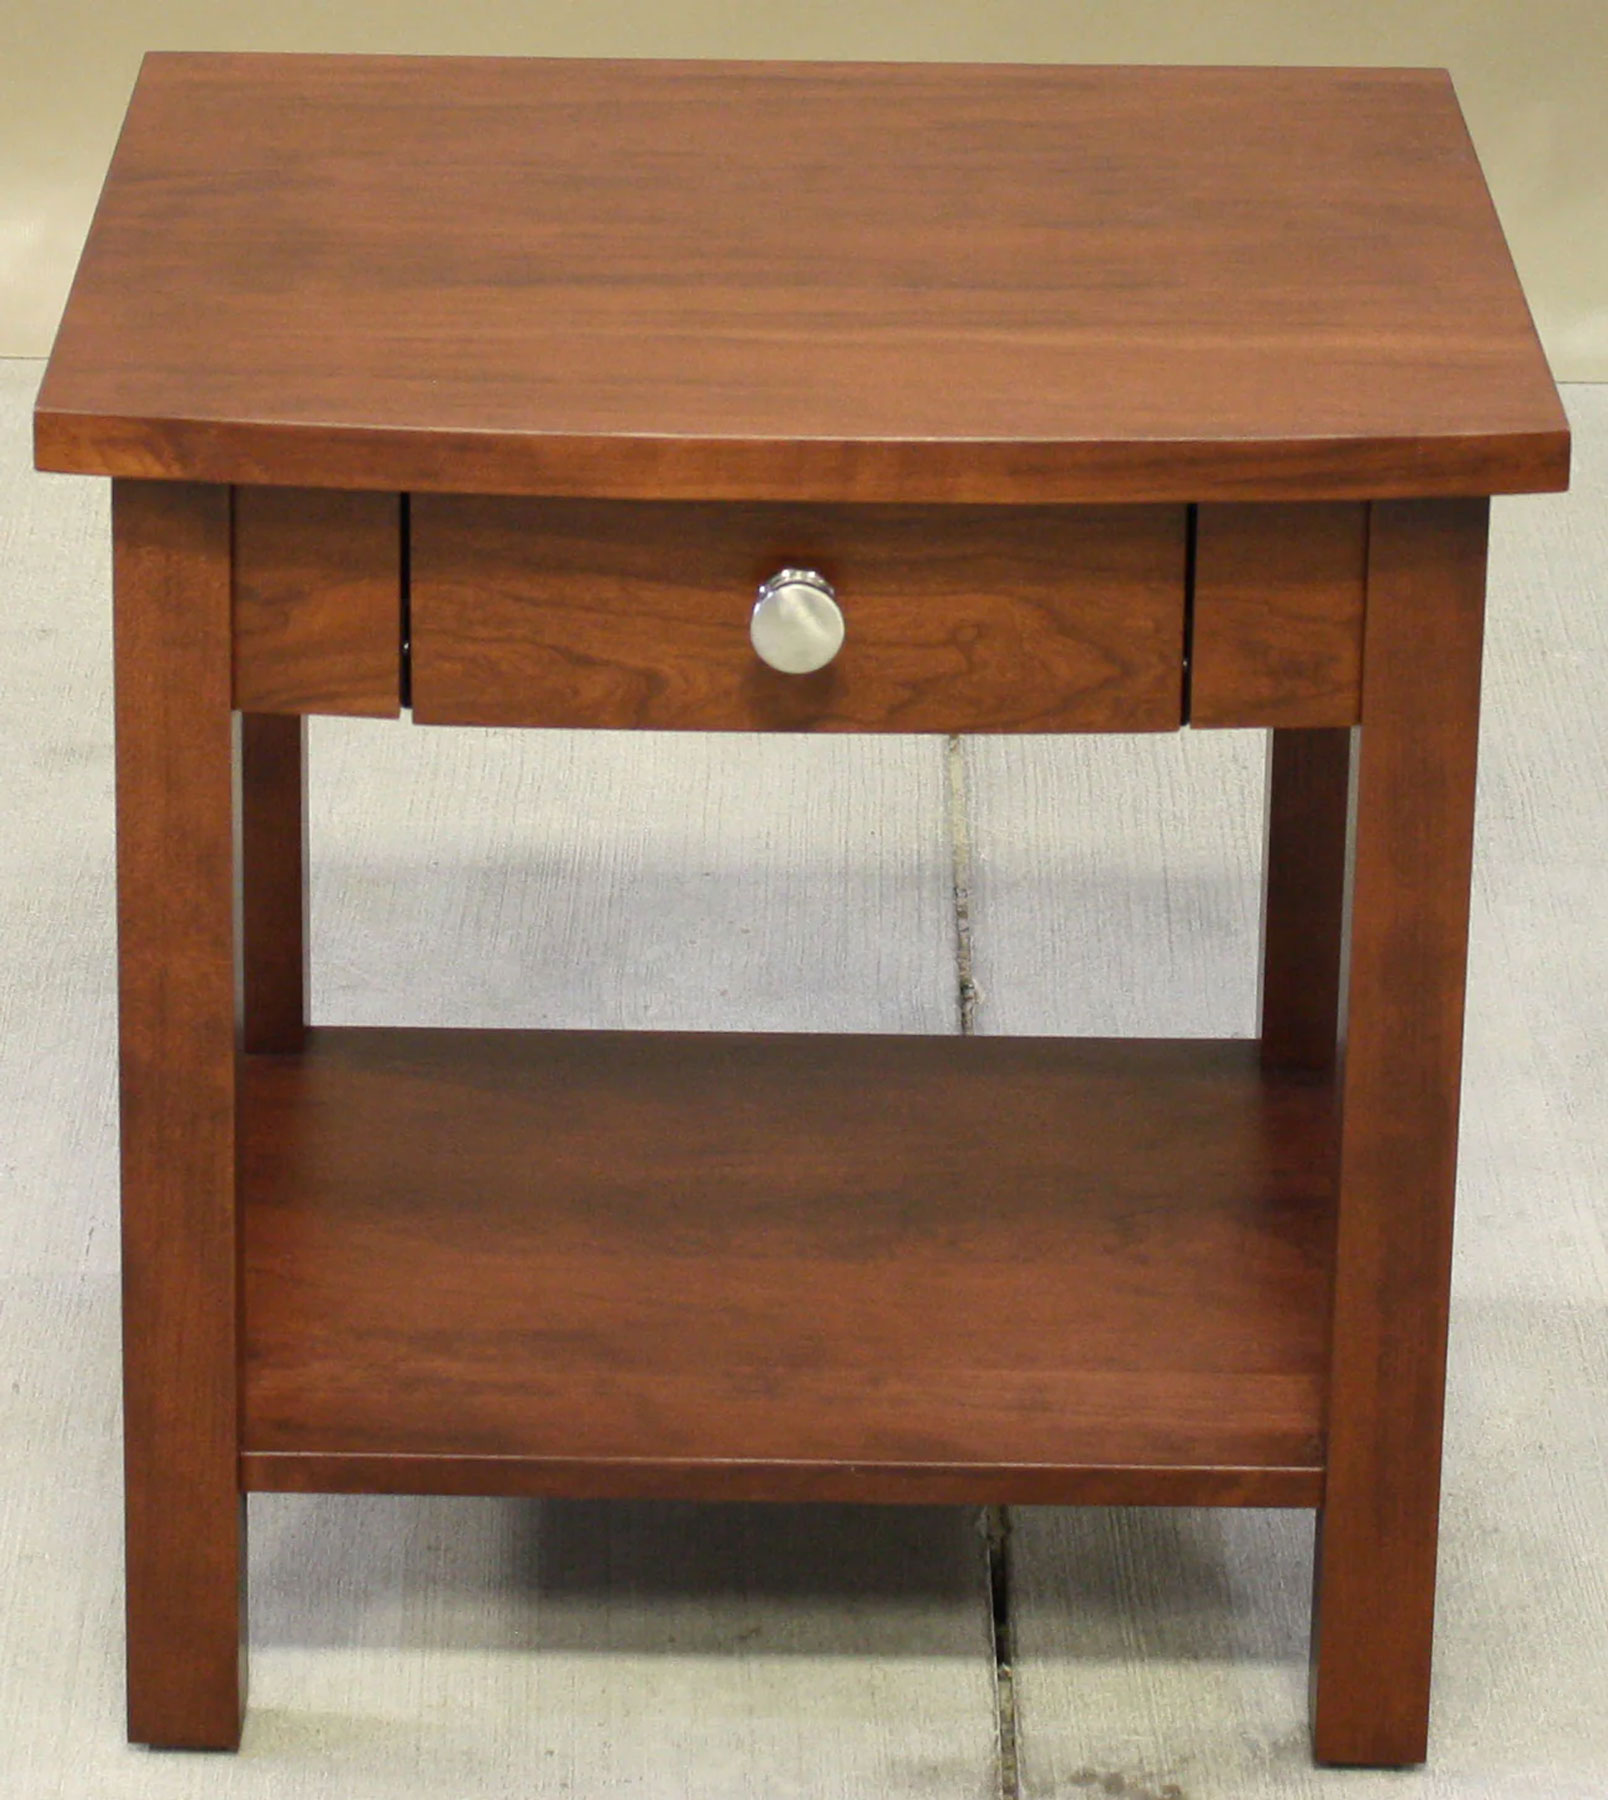 Arch End Table in Cherry